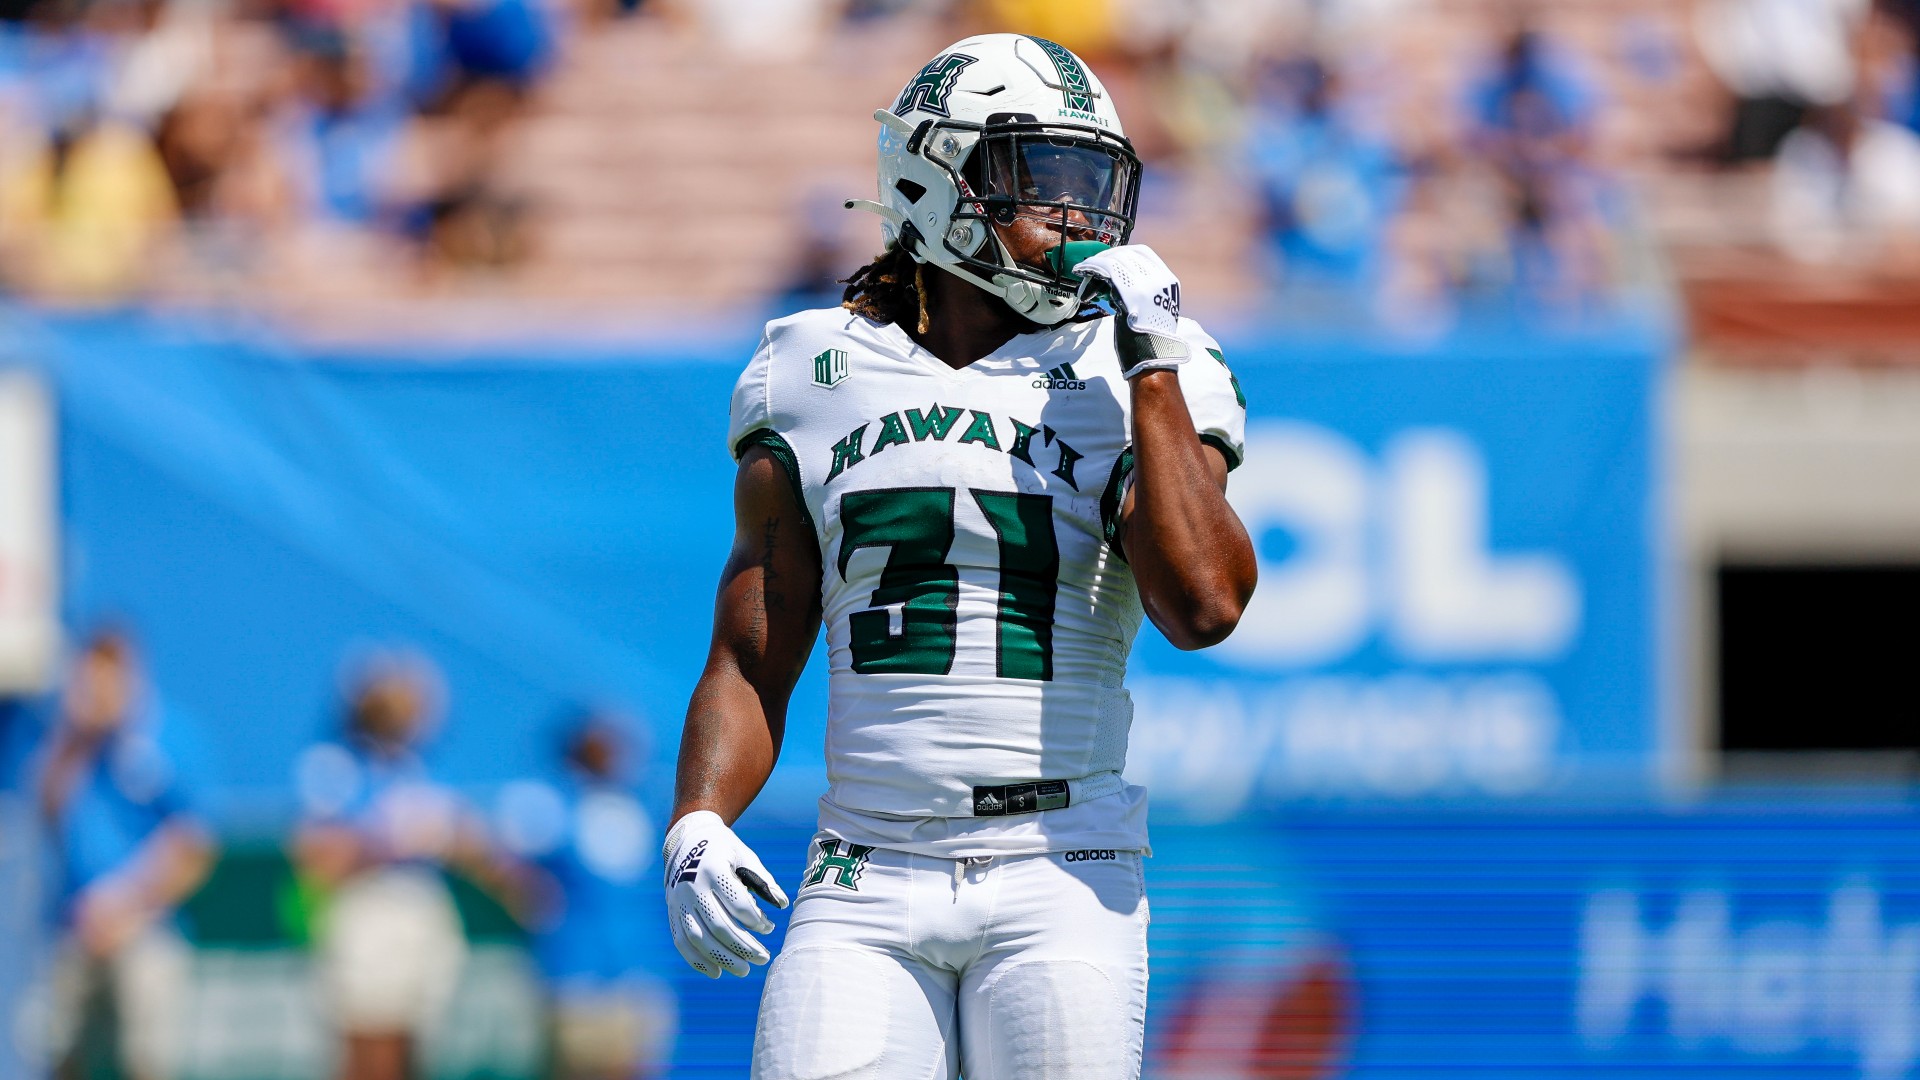 Hawaii vs Utah State Odds, Picks: Saturday College Football Betting Preview article feature image